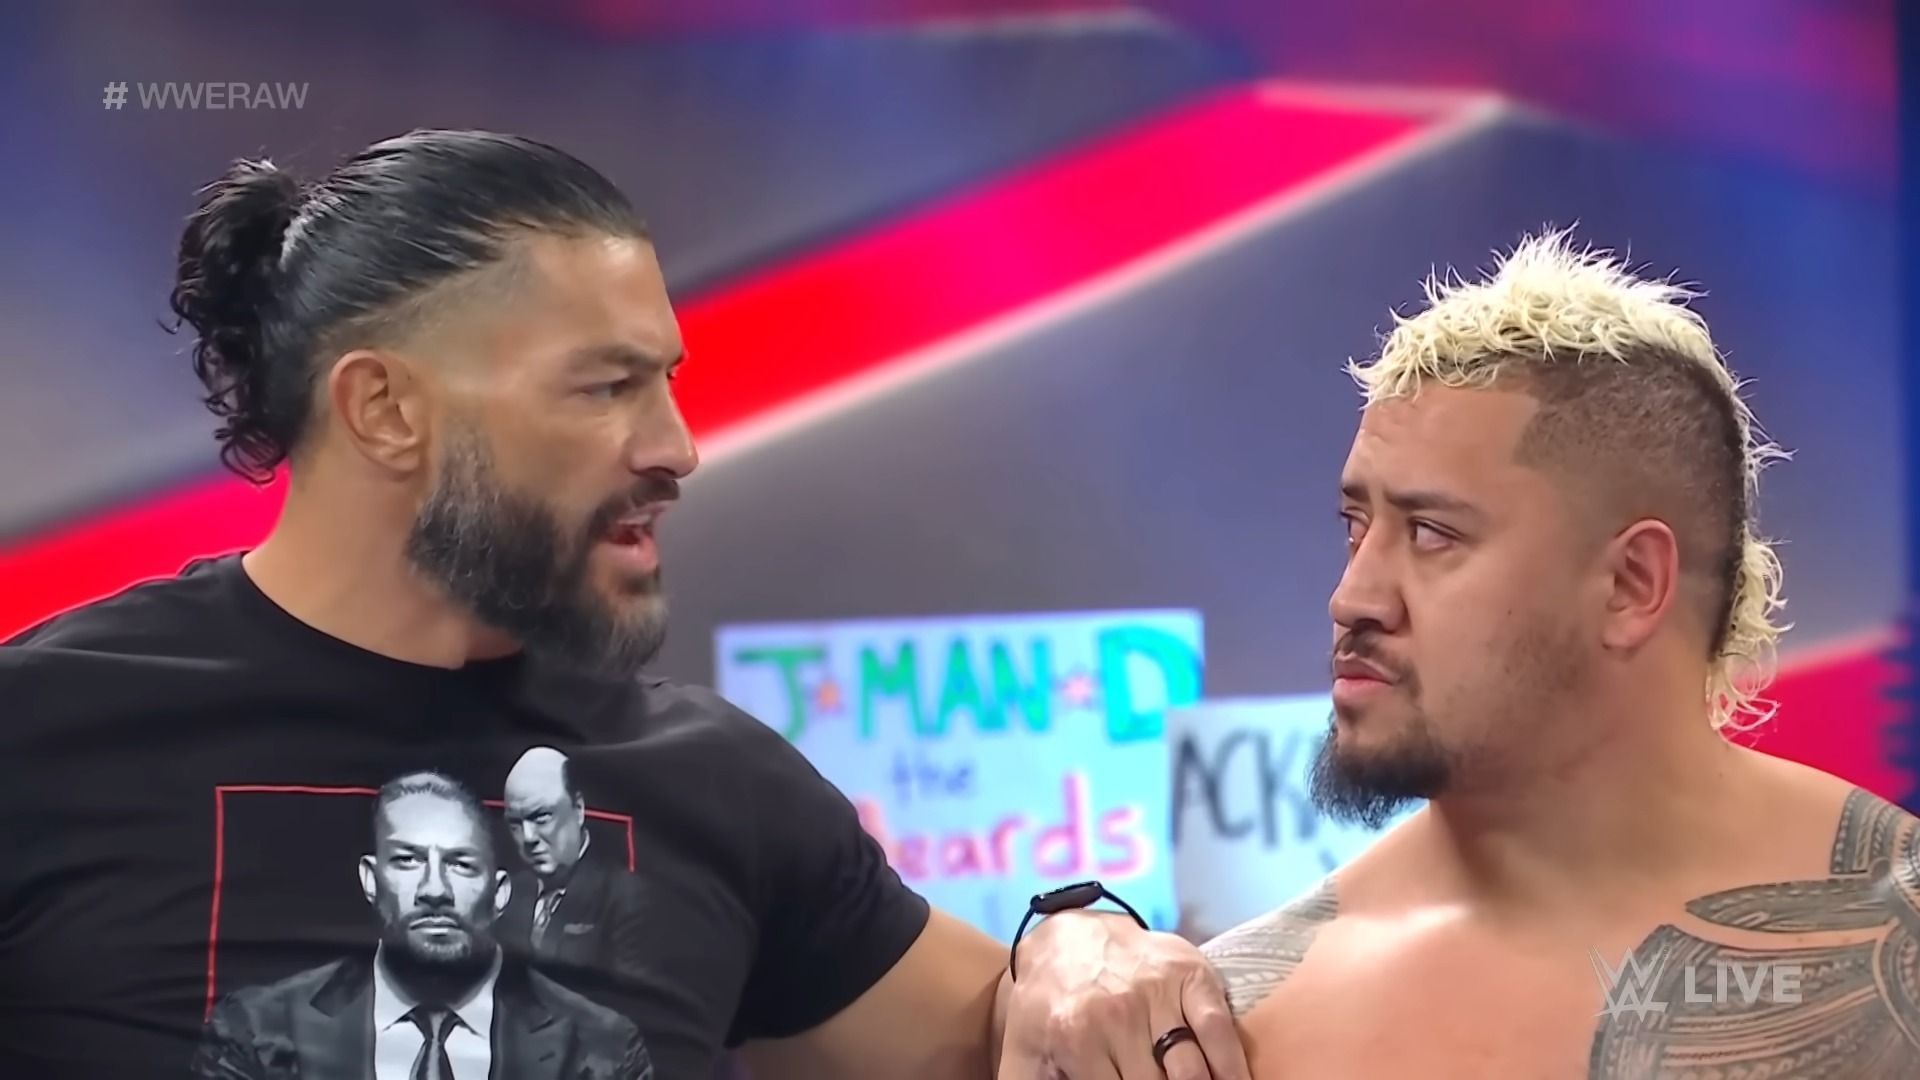 Roman Reigns and Solo Sikoa [ Image Source: Screenshot from WWE